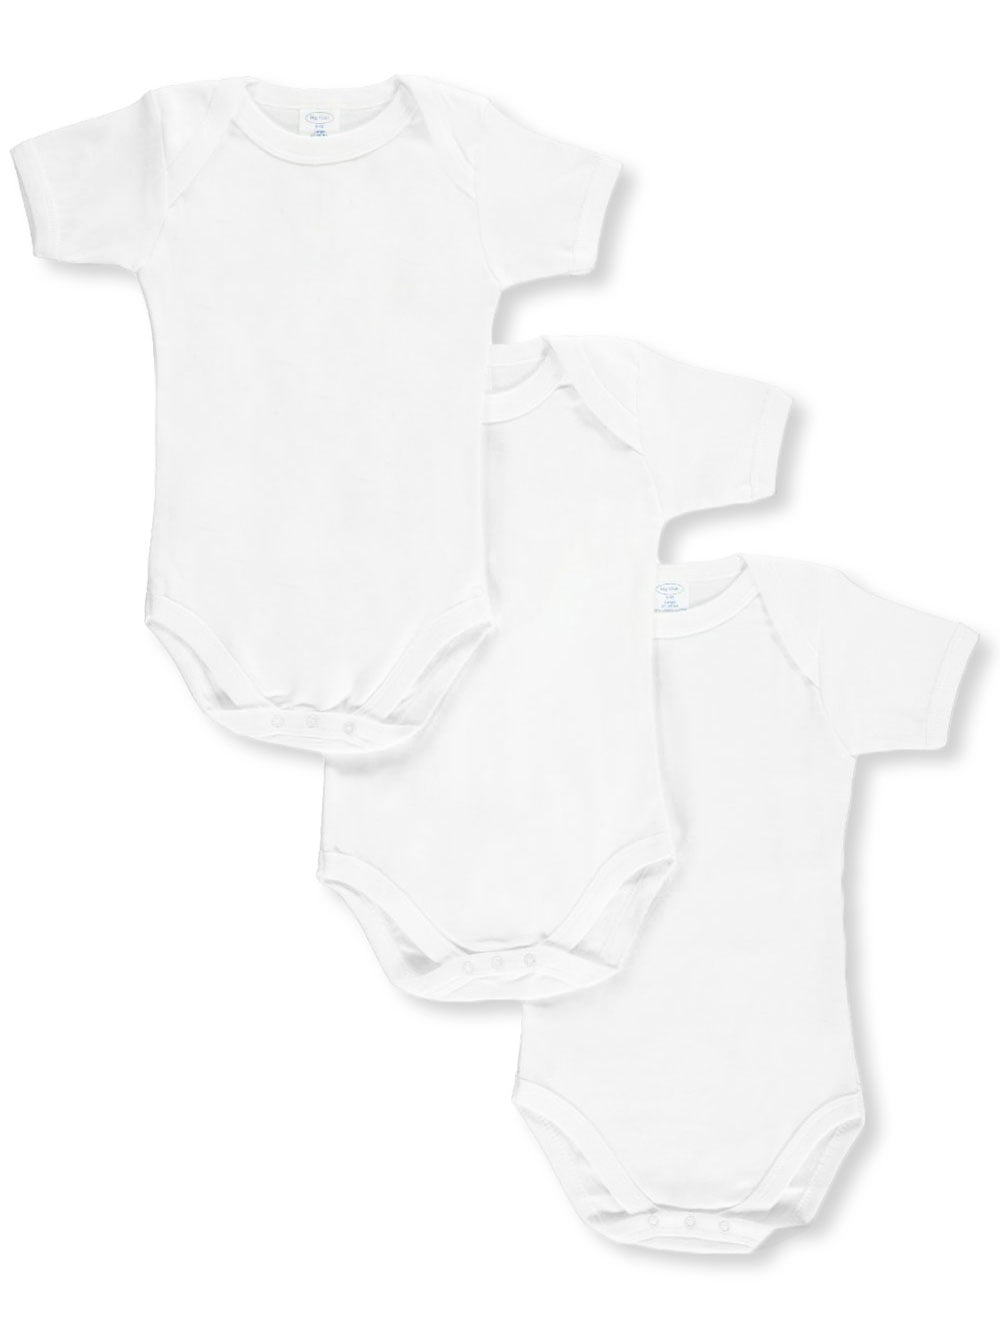 Age 18-24 Months Mothercare Mothercare 7 Long Sleeve White Bodysuits 